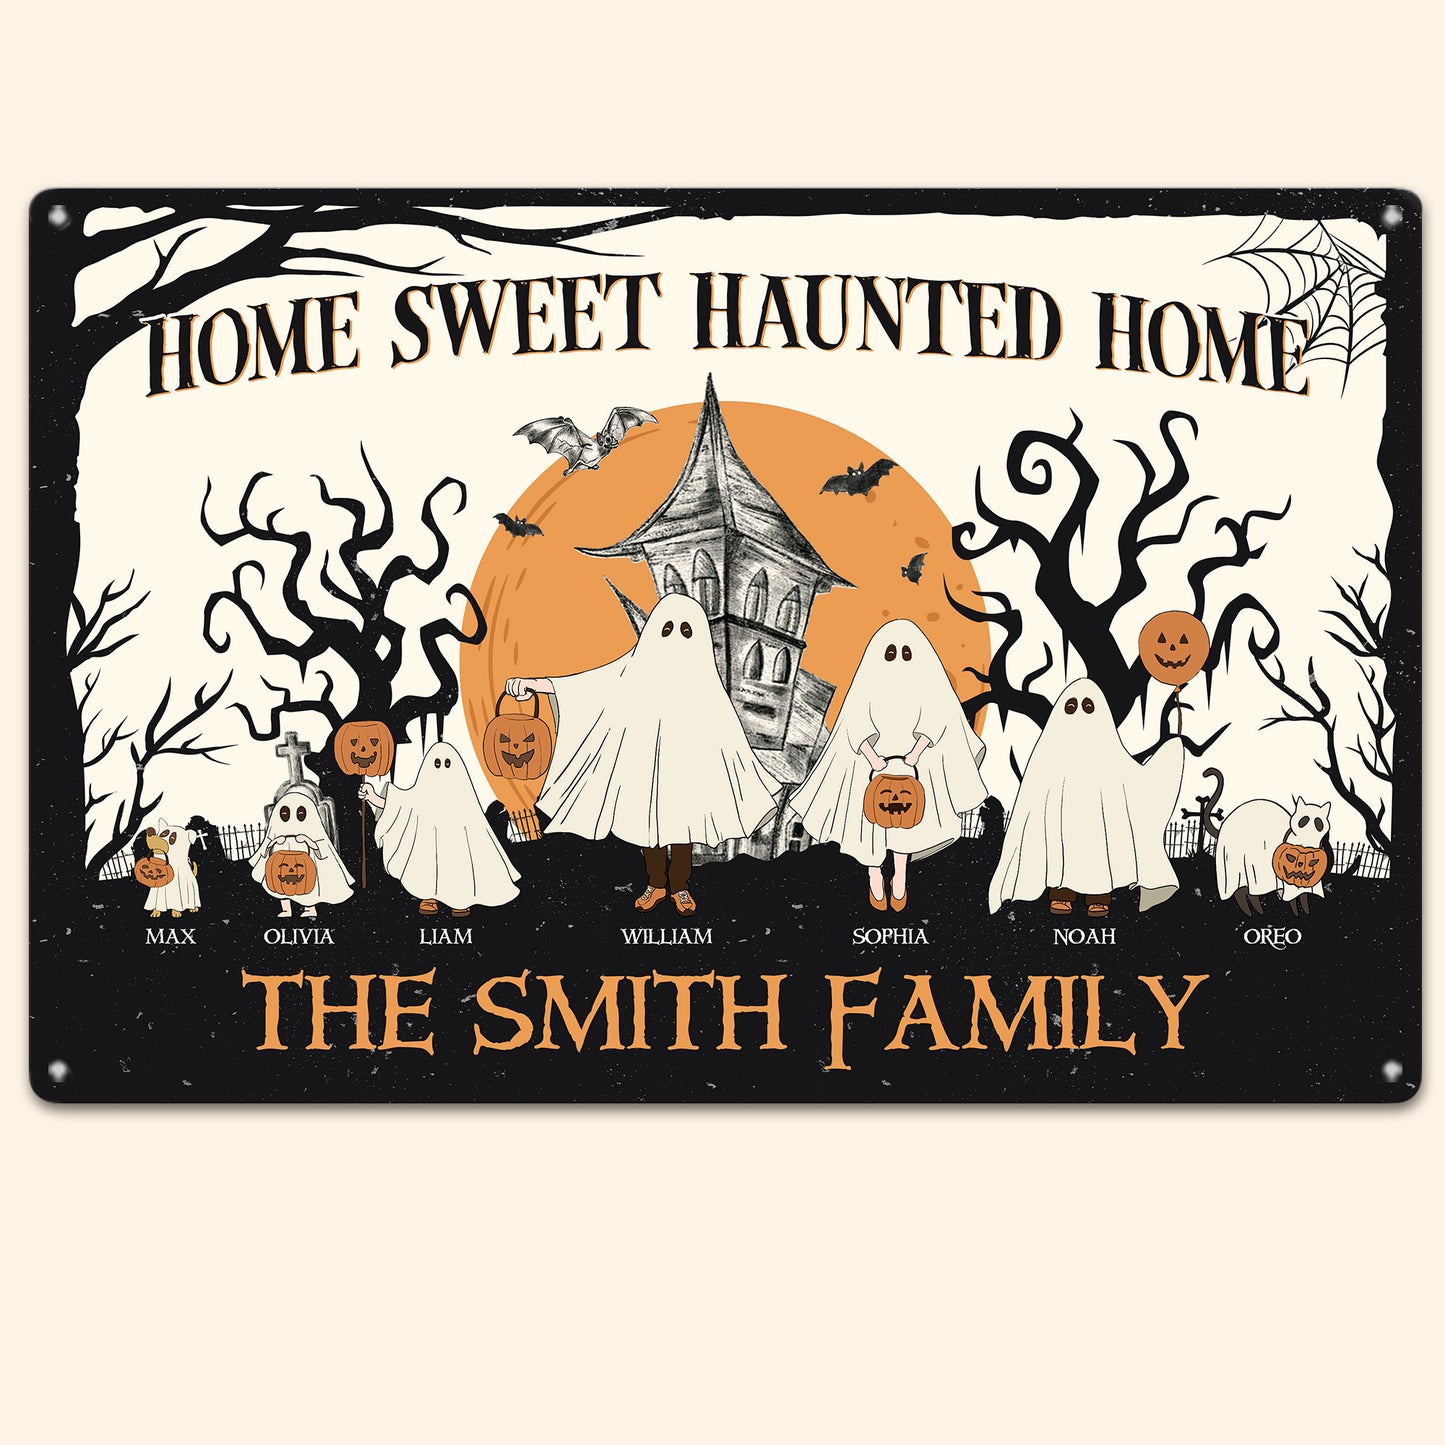 Home Sweet Haunted Home - Personalized Metal Sign - Halloween Gift For Family, Ghost family - Porch Decoration, Halloween Decor